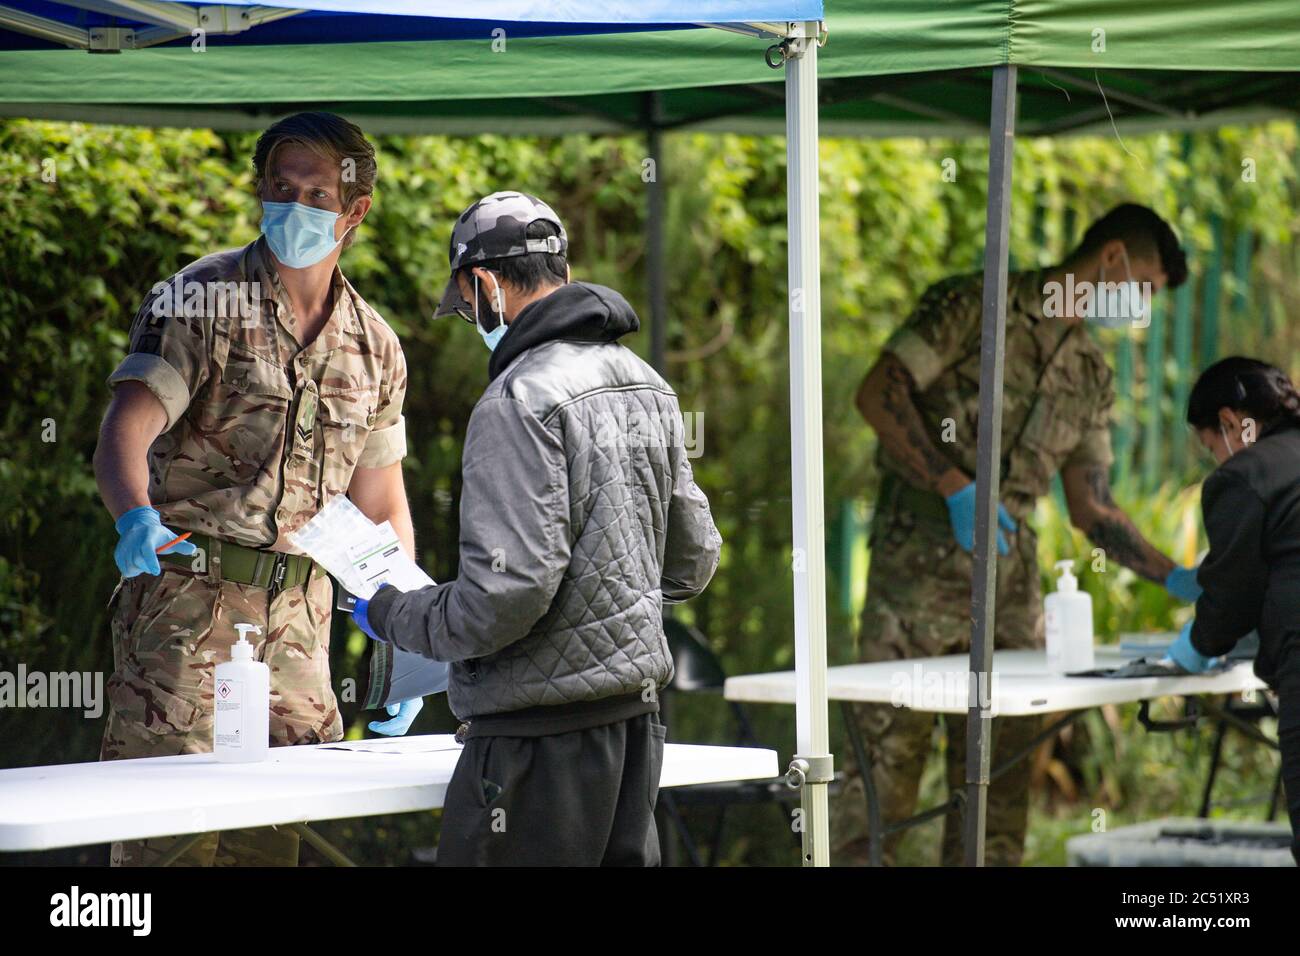 Members of the military at a Covid-19 testing centre in Spinney Hill Park in Leicester, after the Health Secretary Matt Hancock imposed a local lockdown following a spike in coronavirus cases in the city. Stock Photo